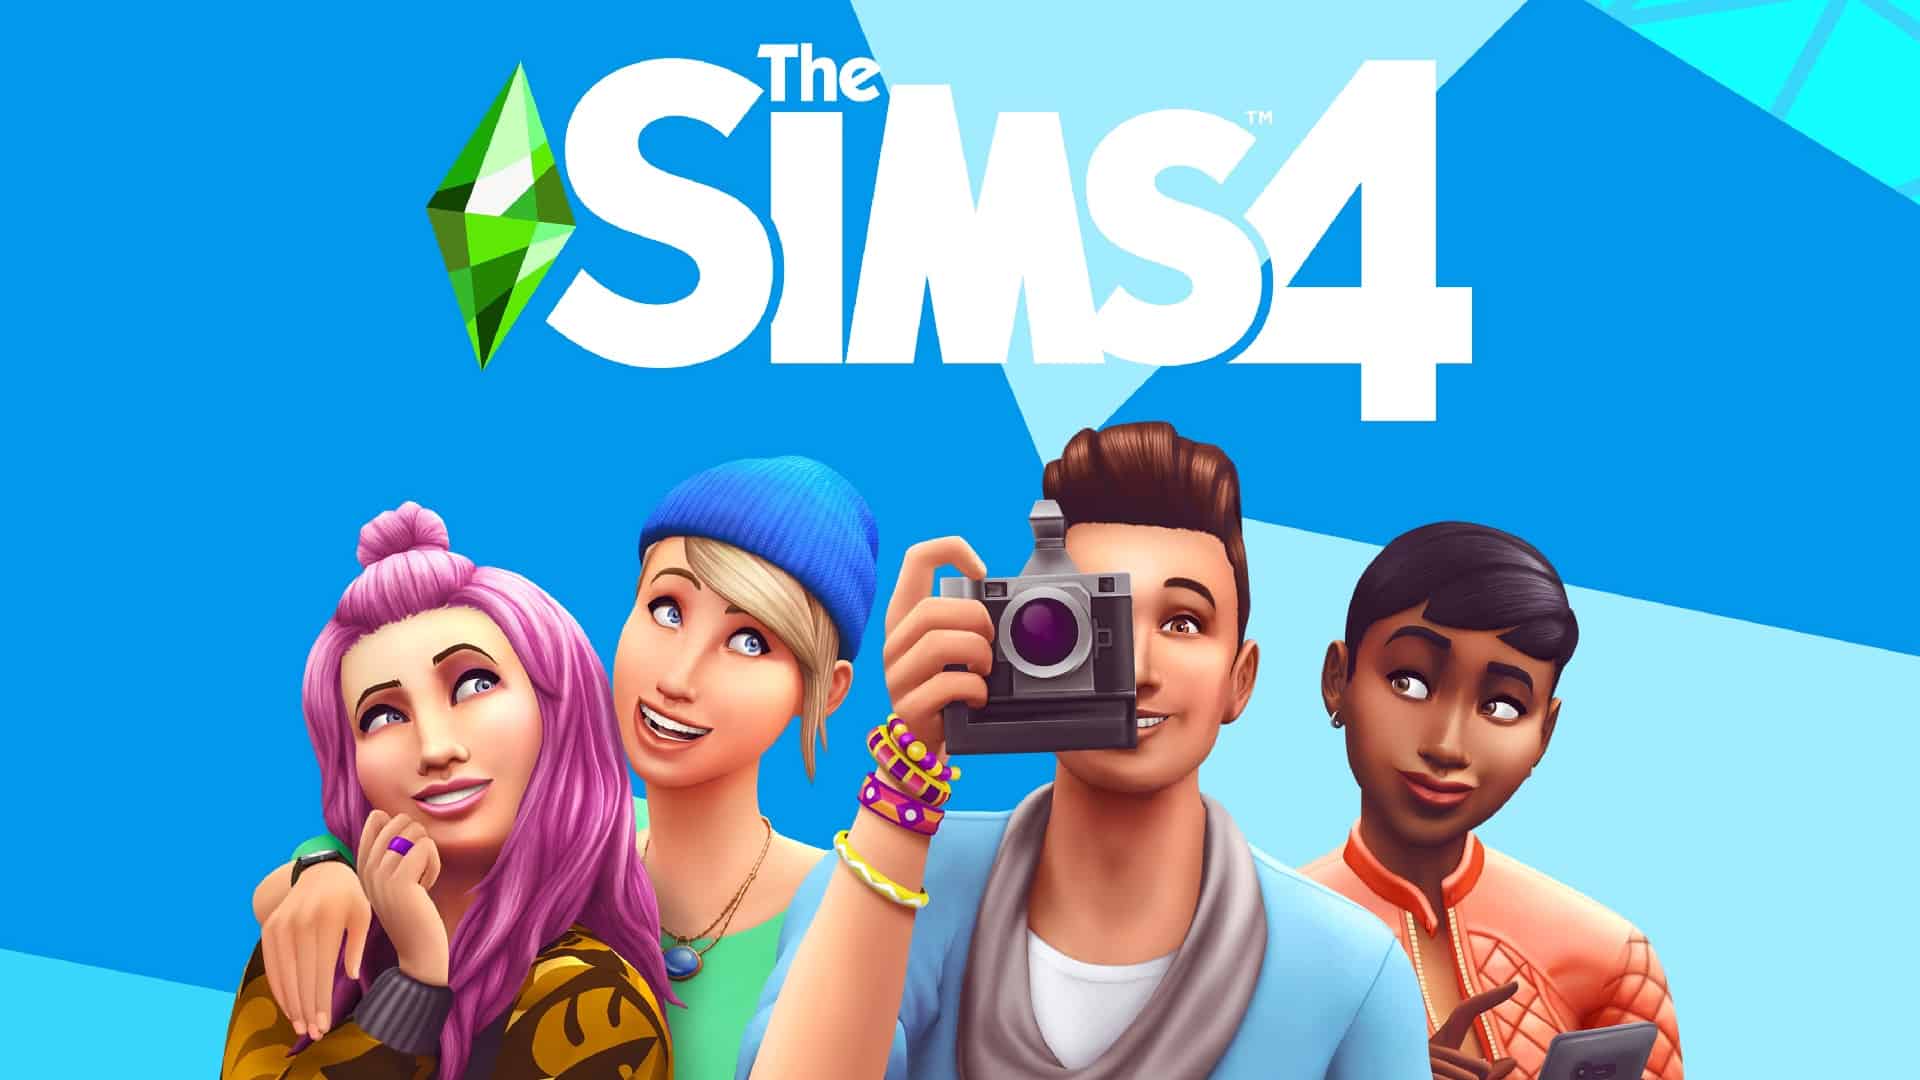 money cheat for sims 4 ps5｜TikTok Search